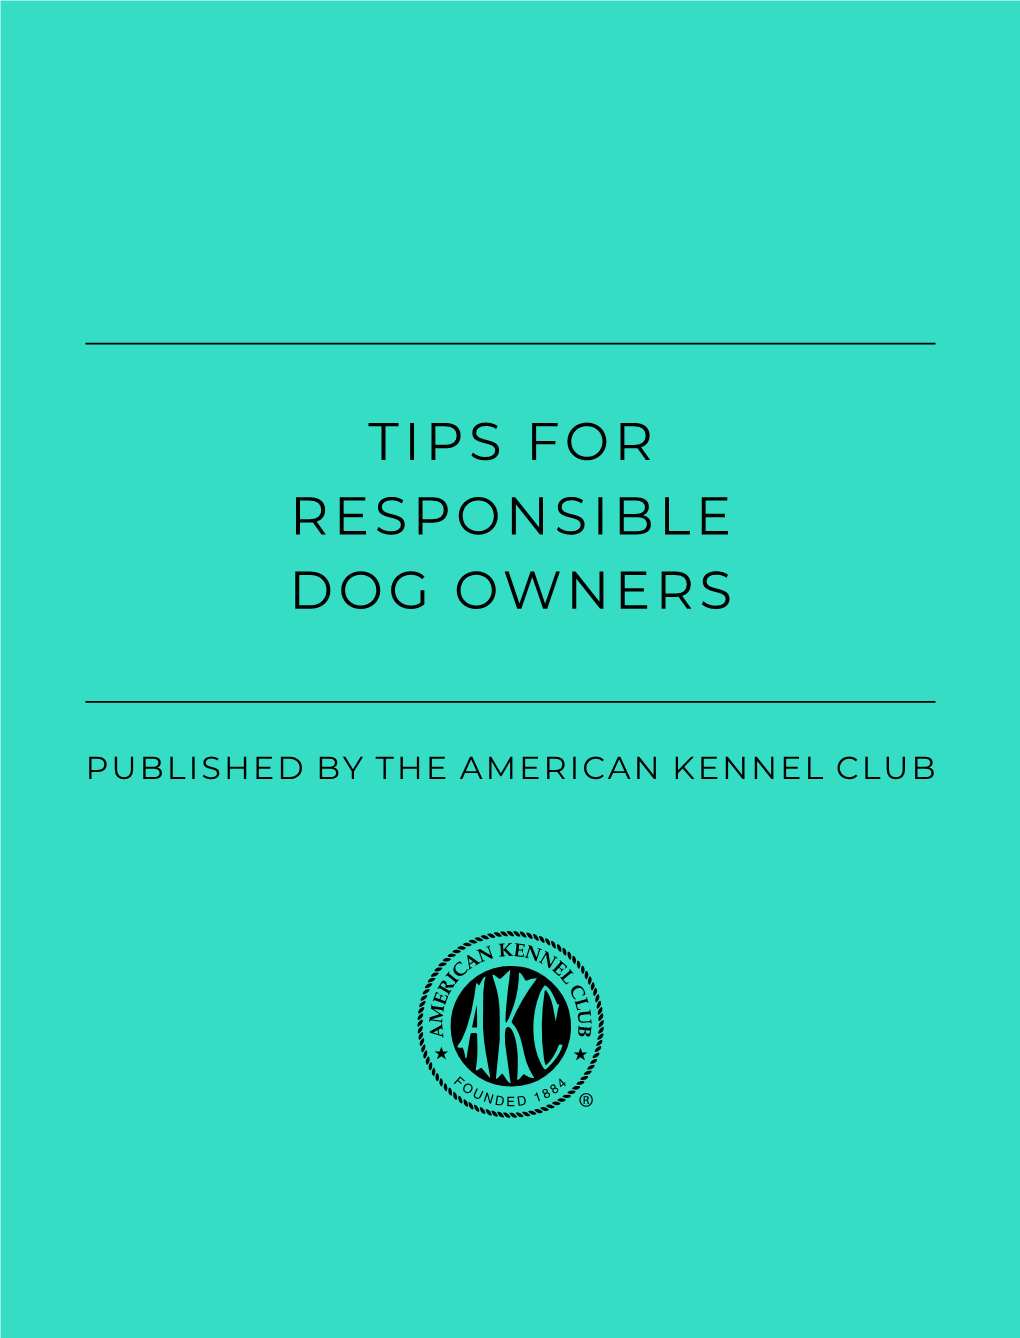 Tips for Responsible Dog Owners